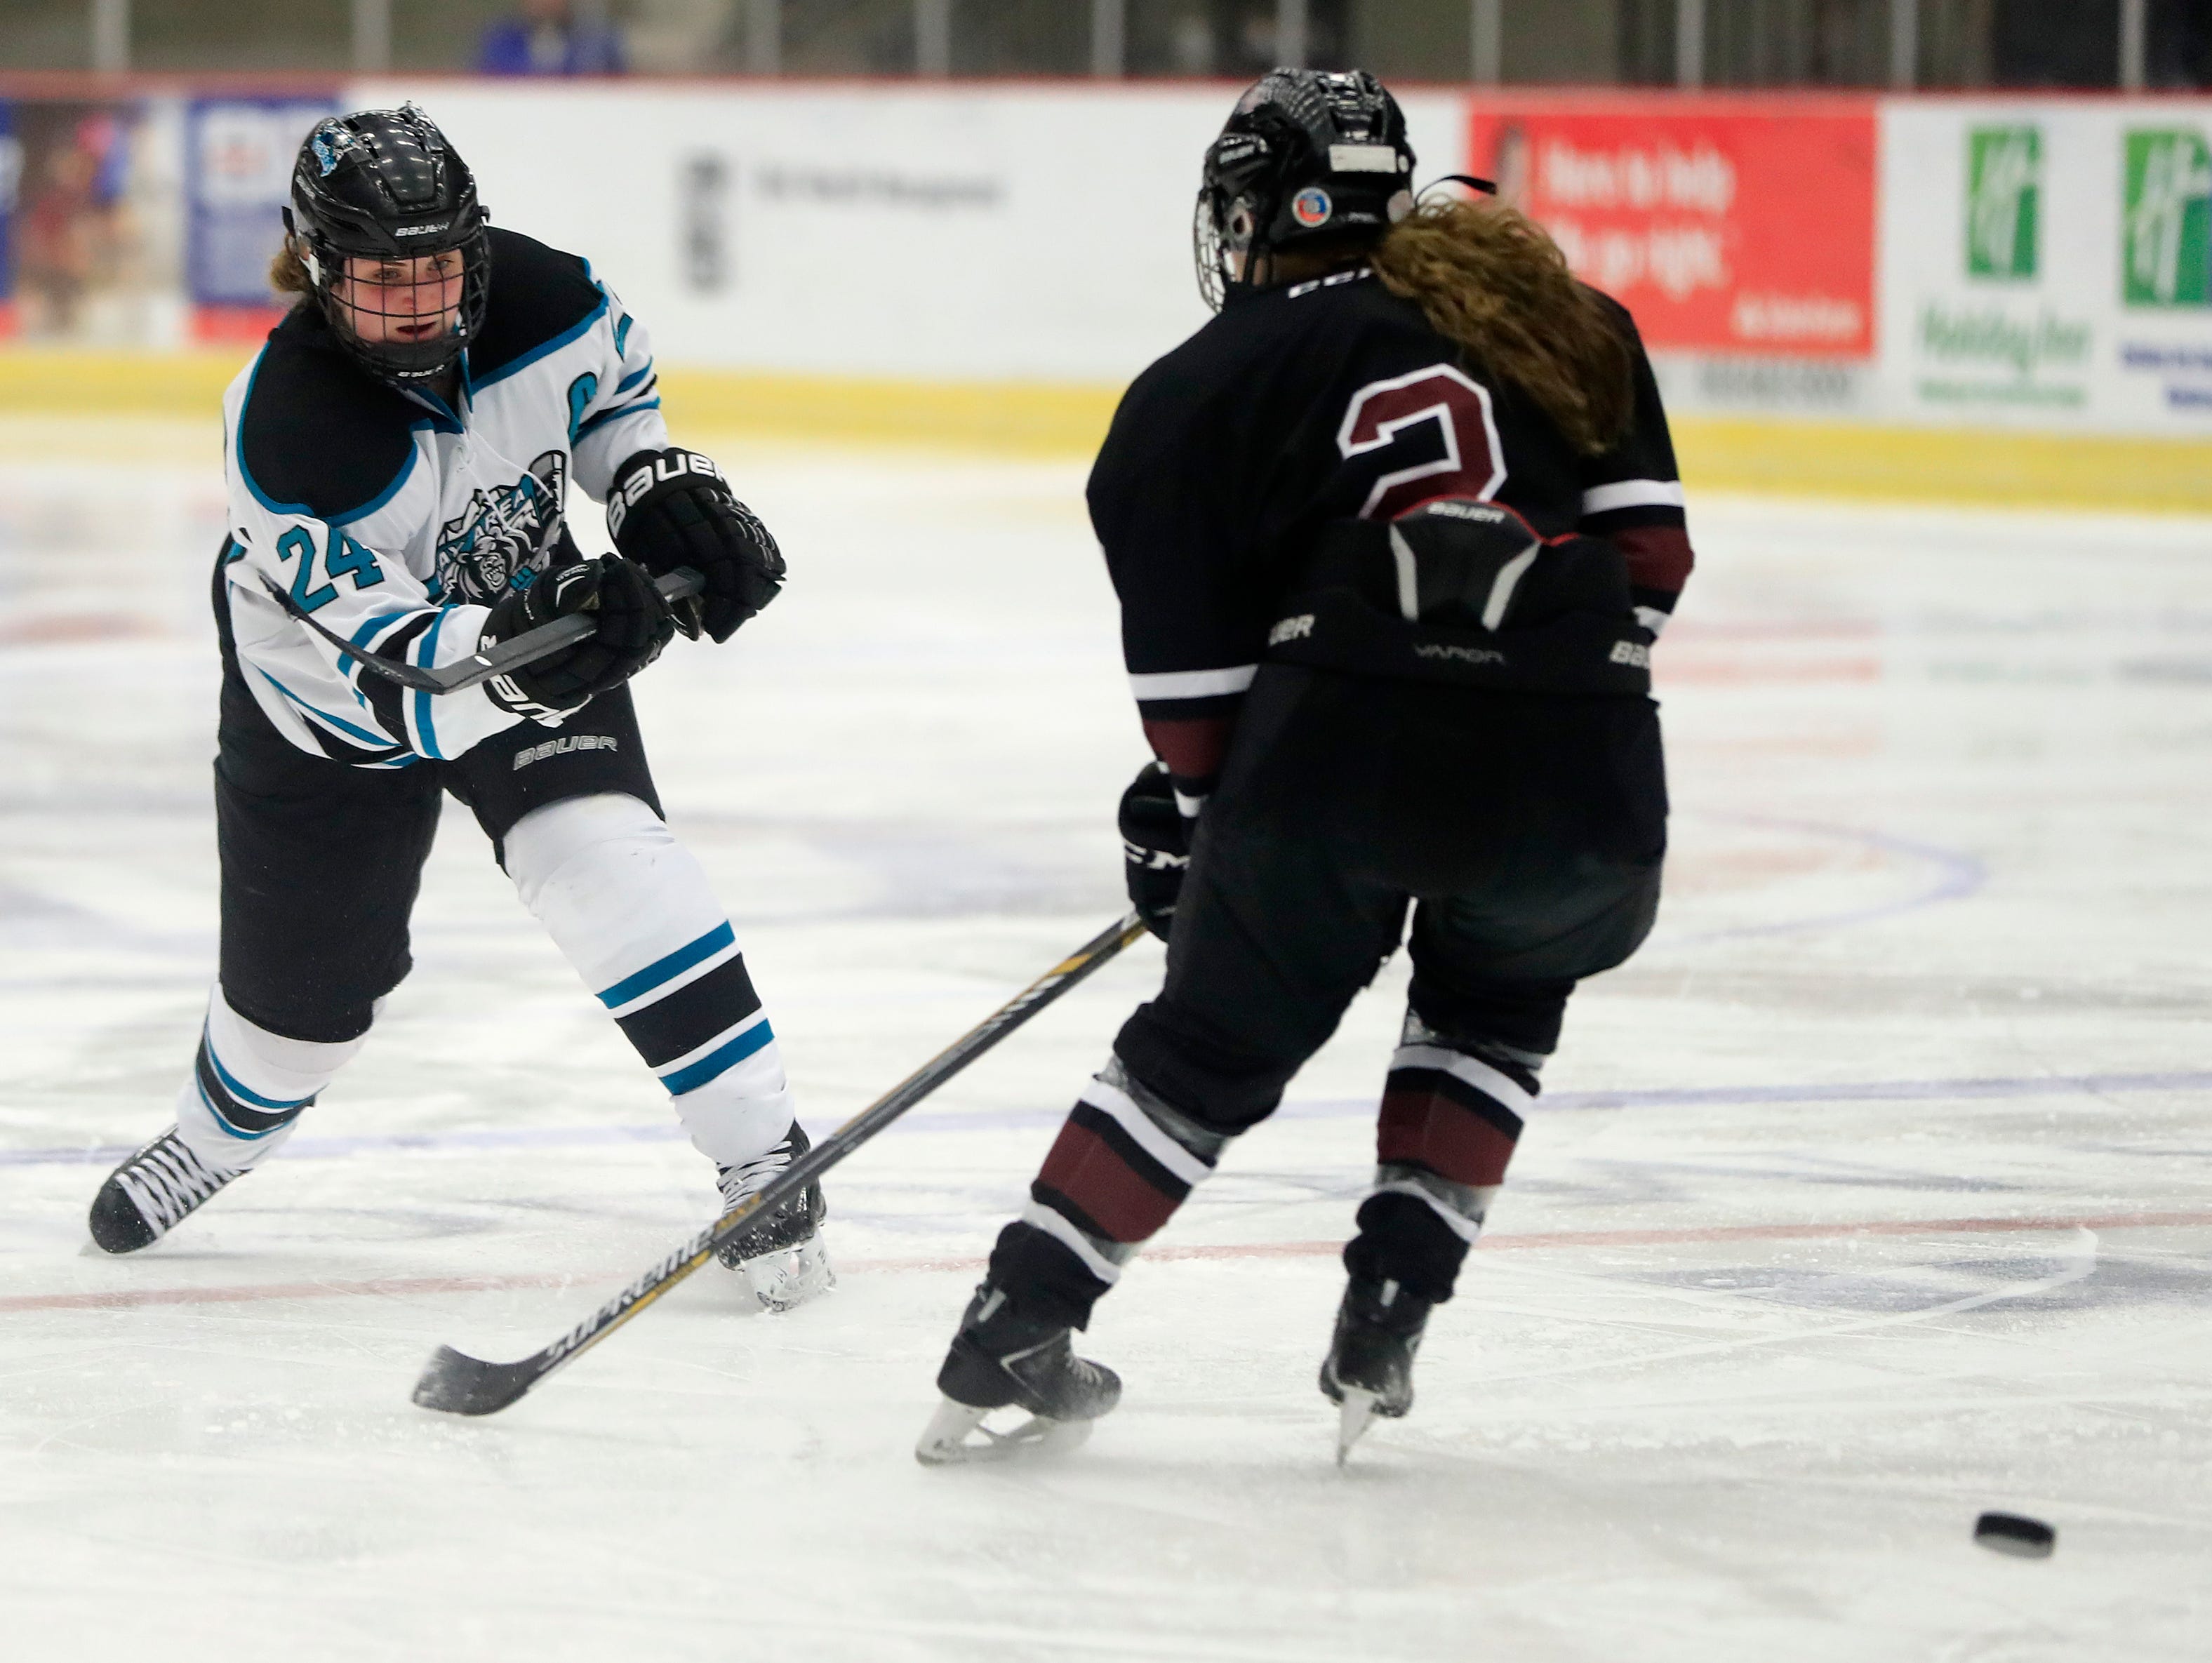 Bay Area Ice Bears defenseman Mia Dunning (24) shoots against the Central Wisconsin Storm in the championship match at the 2017 State Hockey Tournament at Veterans Memorial Coliseum on Saturday, March 4, 2017, in Madison, Wis. The Storm won the match 2-1 in overtime. Adam Wesley/USA TODAY NETWORK-Wisconsin